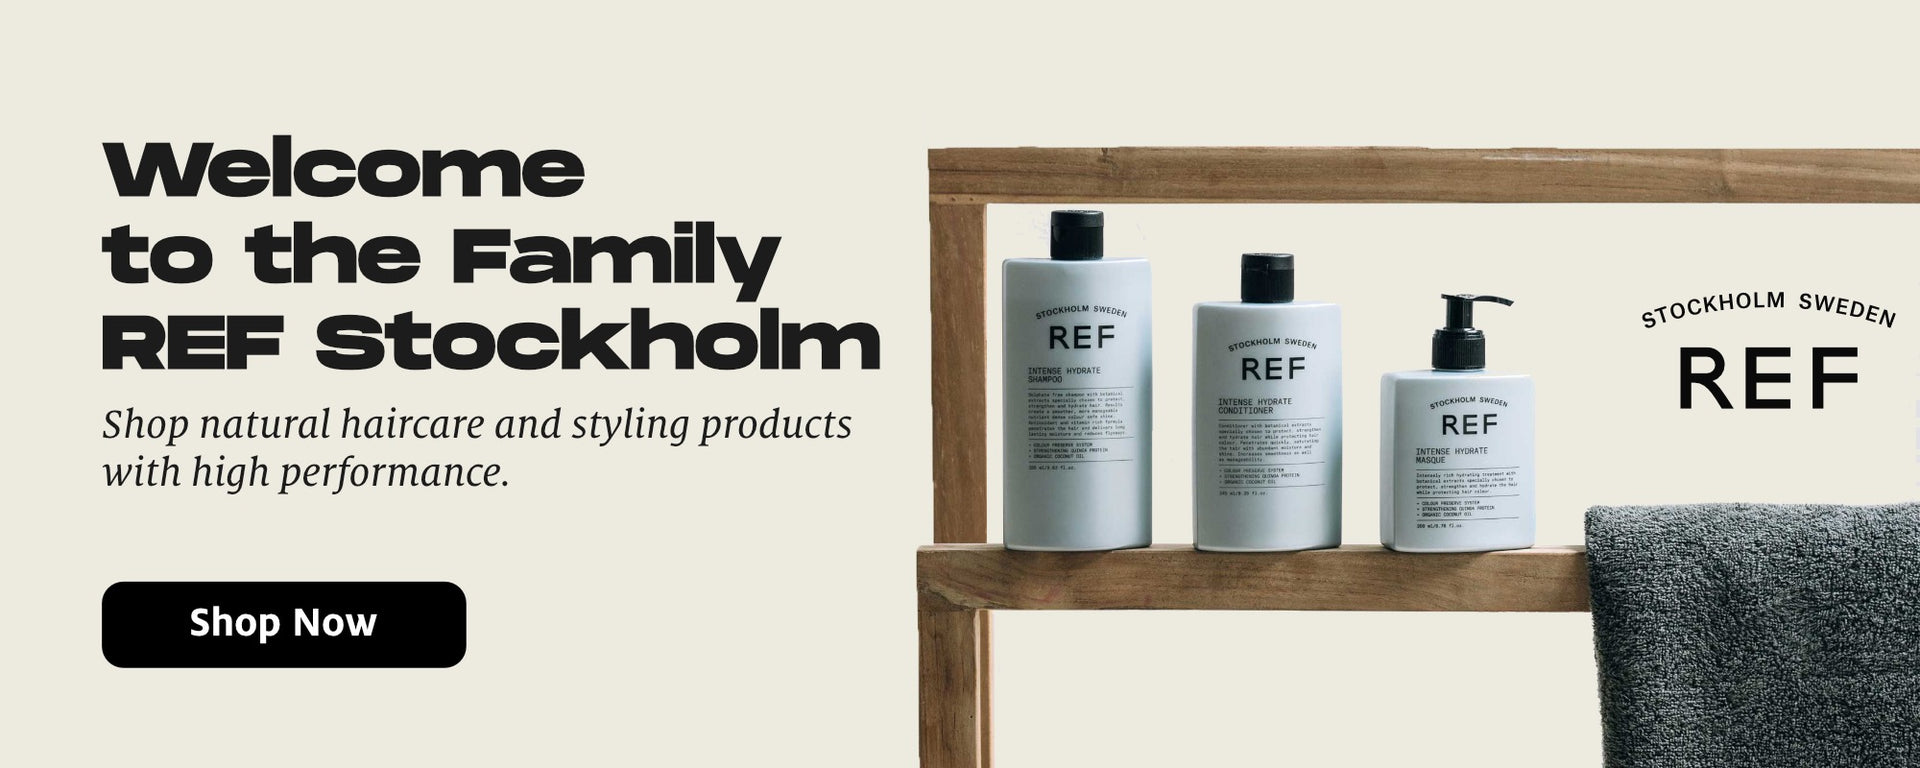 Welcome to the family REF Stockholm. Shop Natural haircare and styling with high performance. 100% Vegan. Highest Quality. CO2 Friendly.